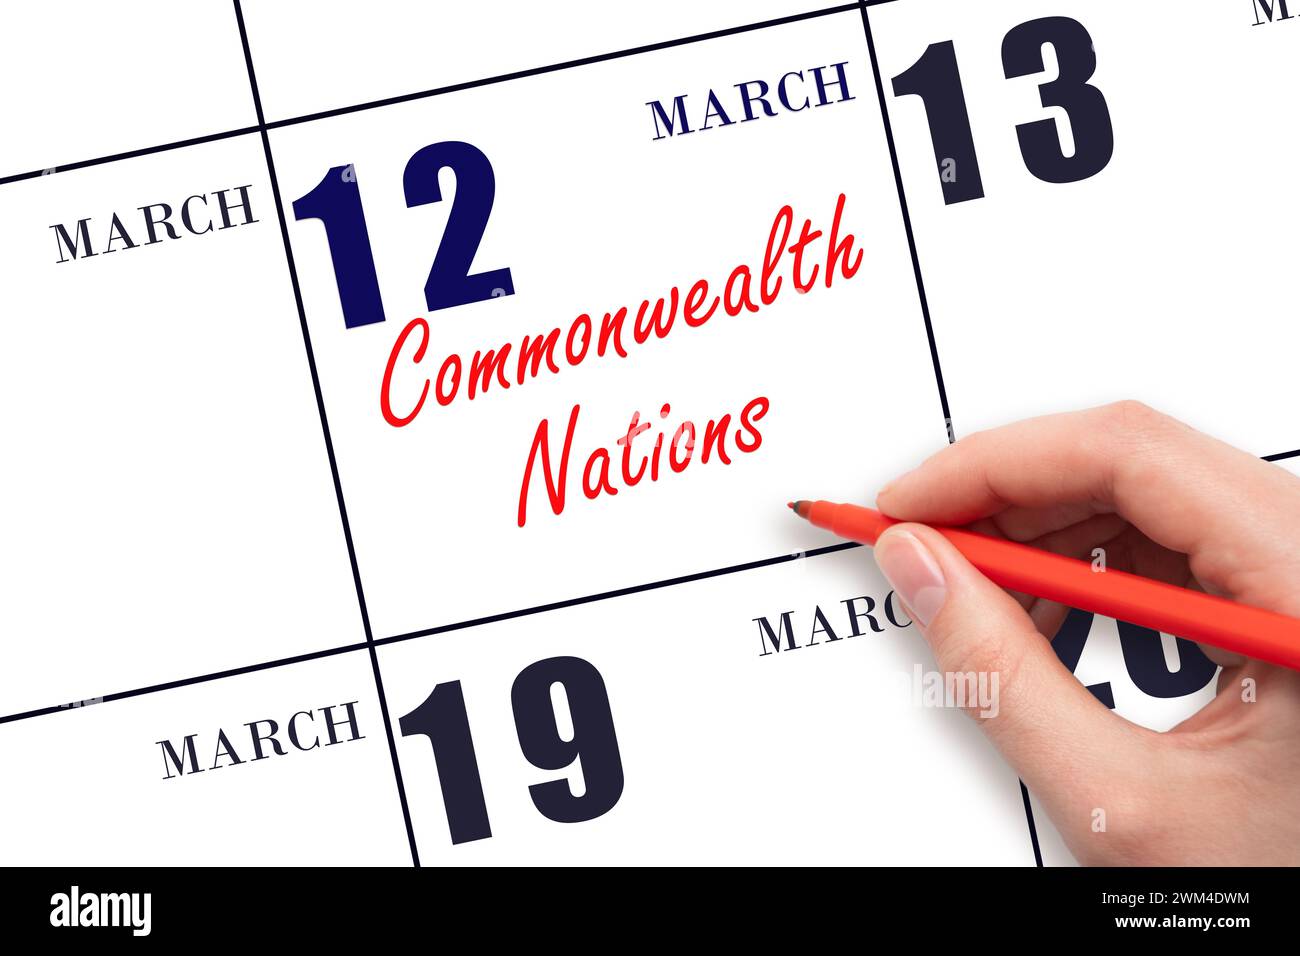 March 12. Hand writing text Commonwealth Nations on calendar date. Save the date. Holiday.  Day of the year concept. Stock Photo